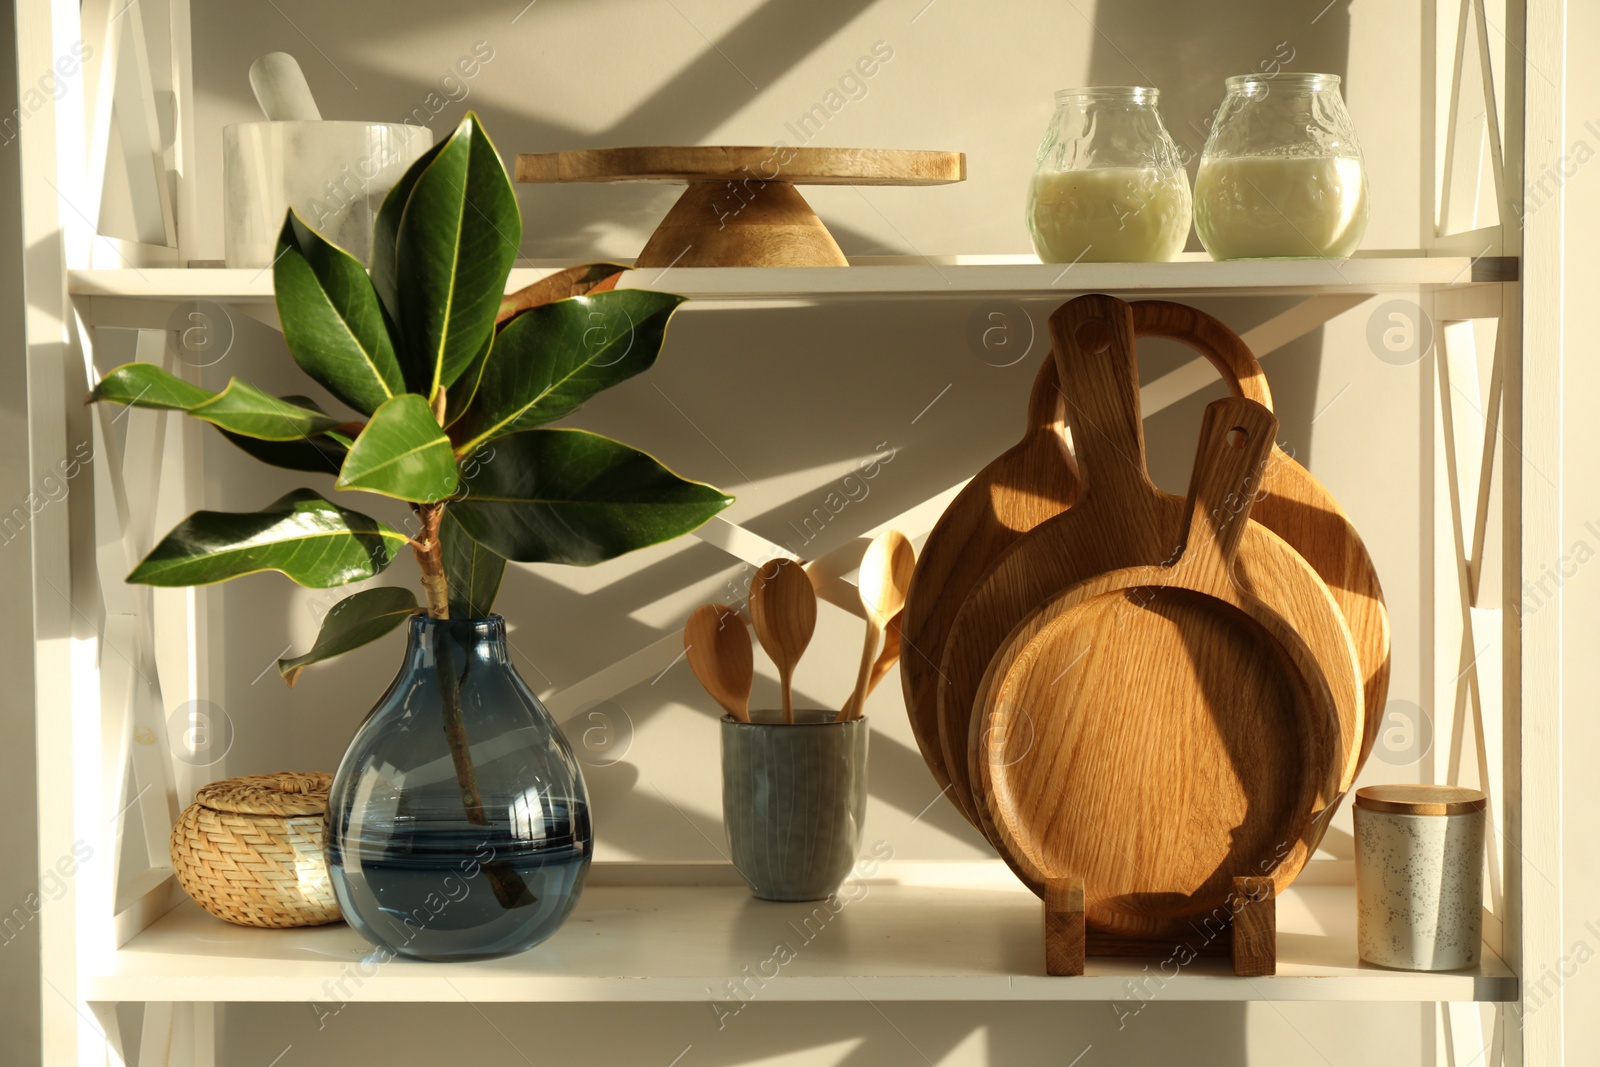 Photo of Wooden cutting boards, utensils, branch with green leaves and decor on shelving unit